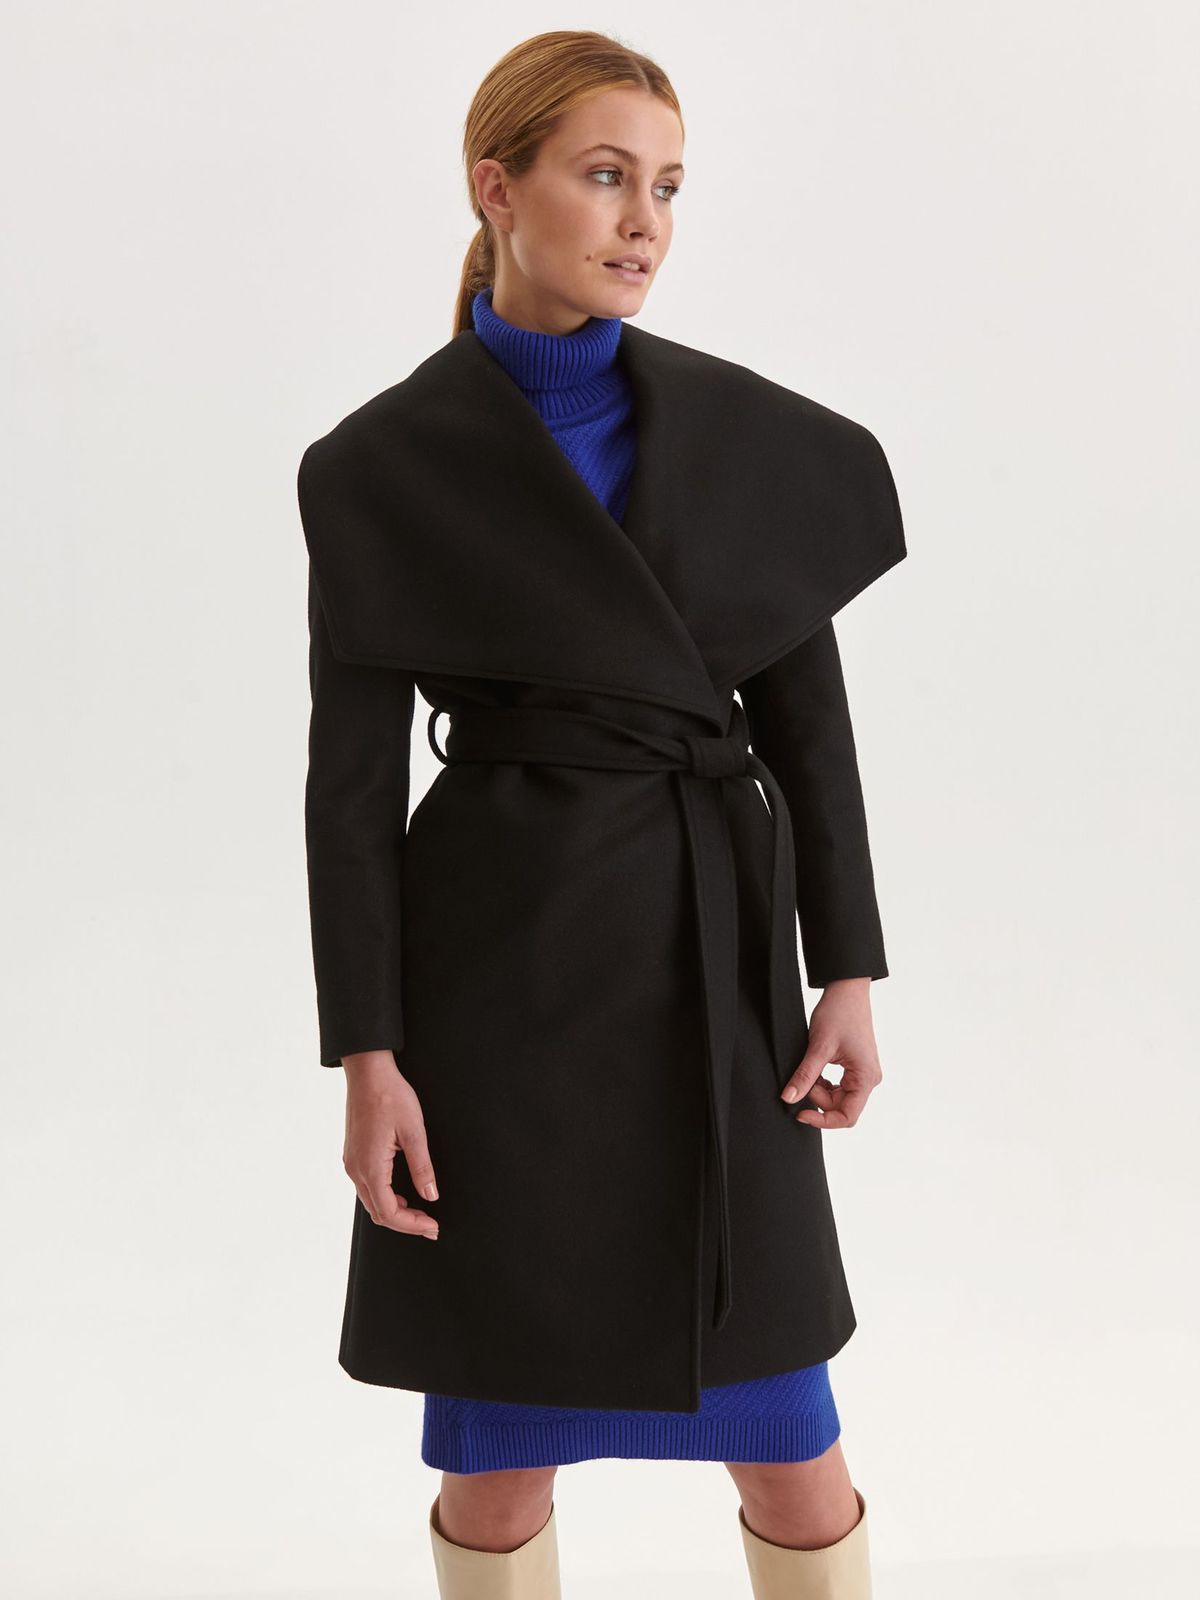 Black coat cloth loose fit accessorized with tied waistband